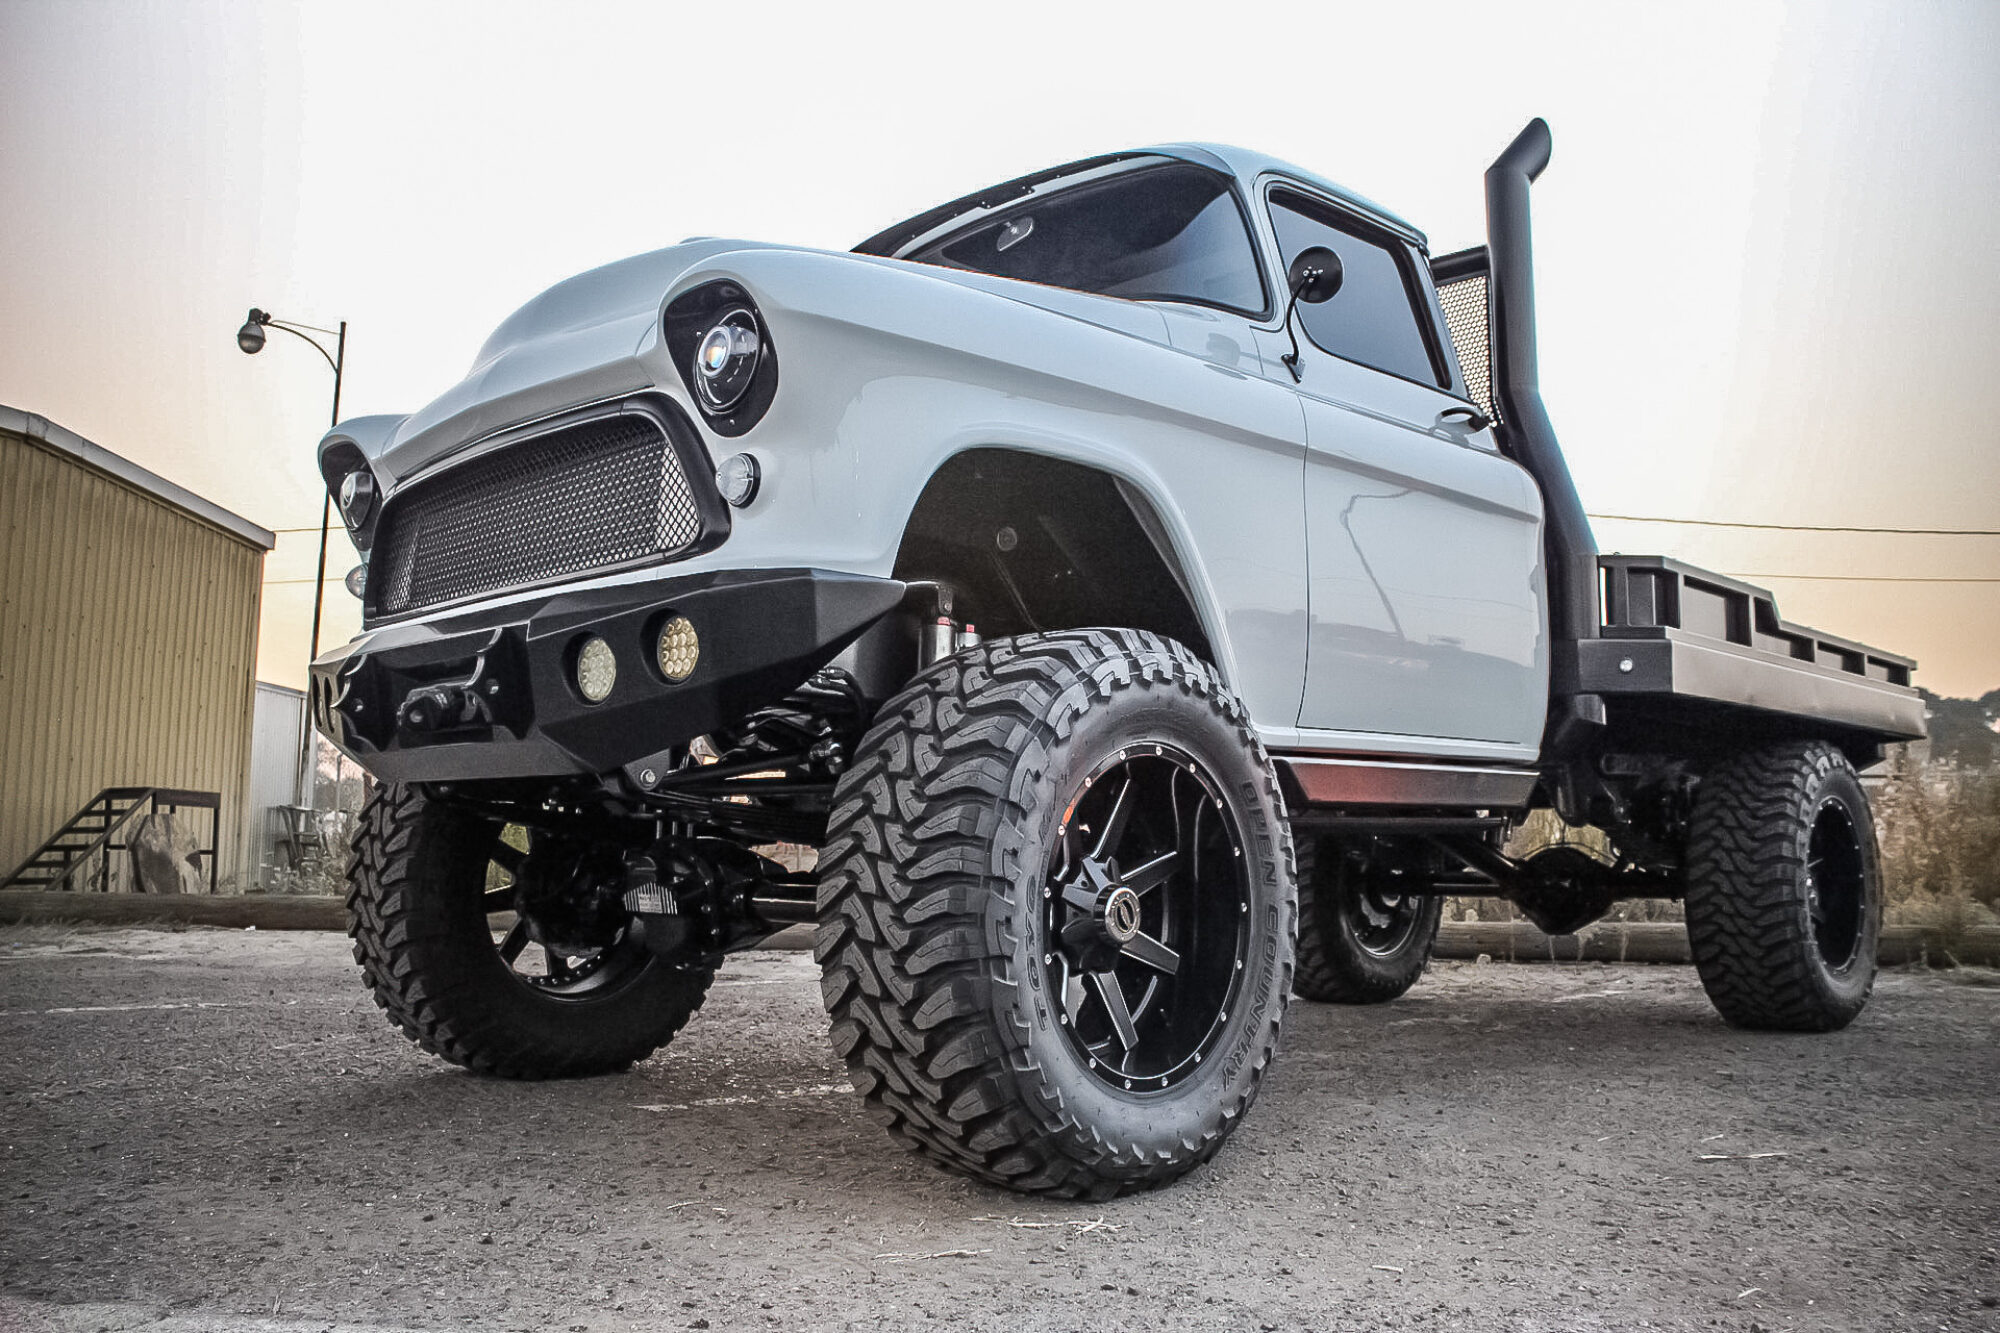 Thorson's Extreme Off-Road